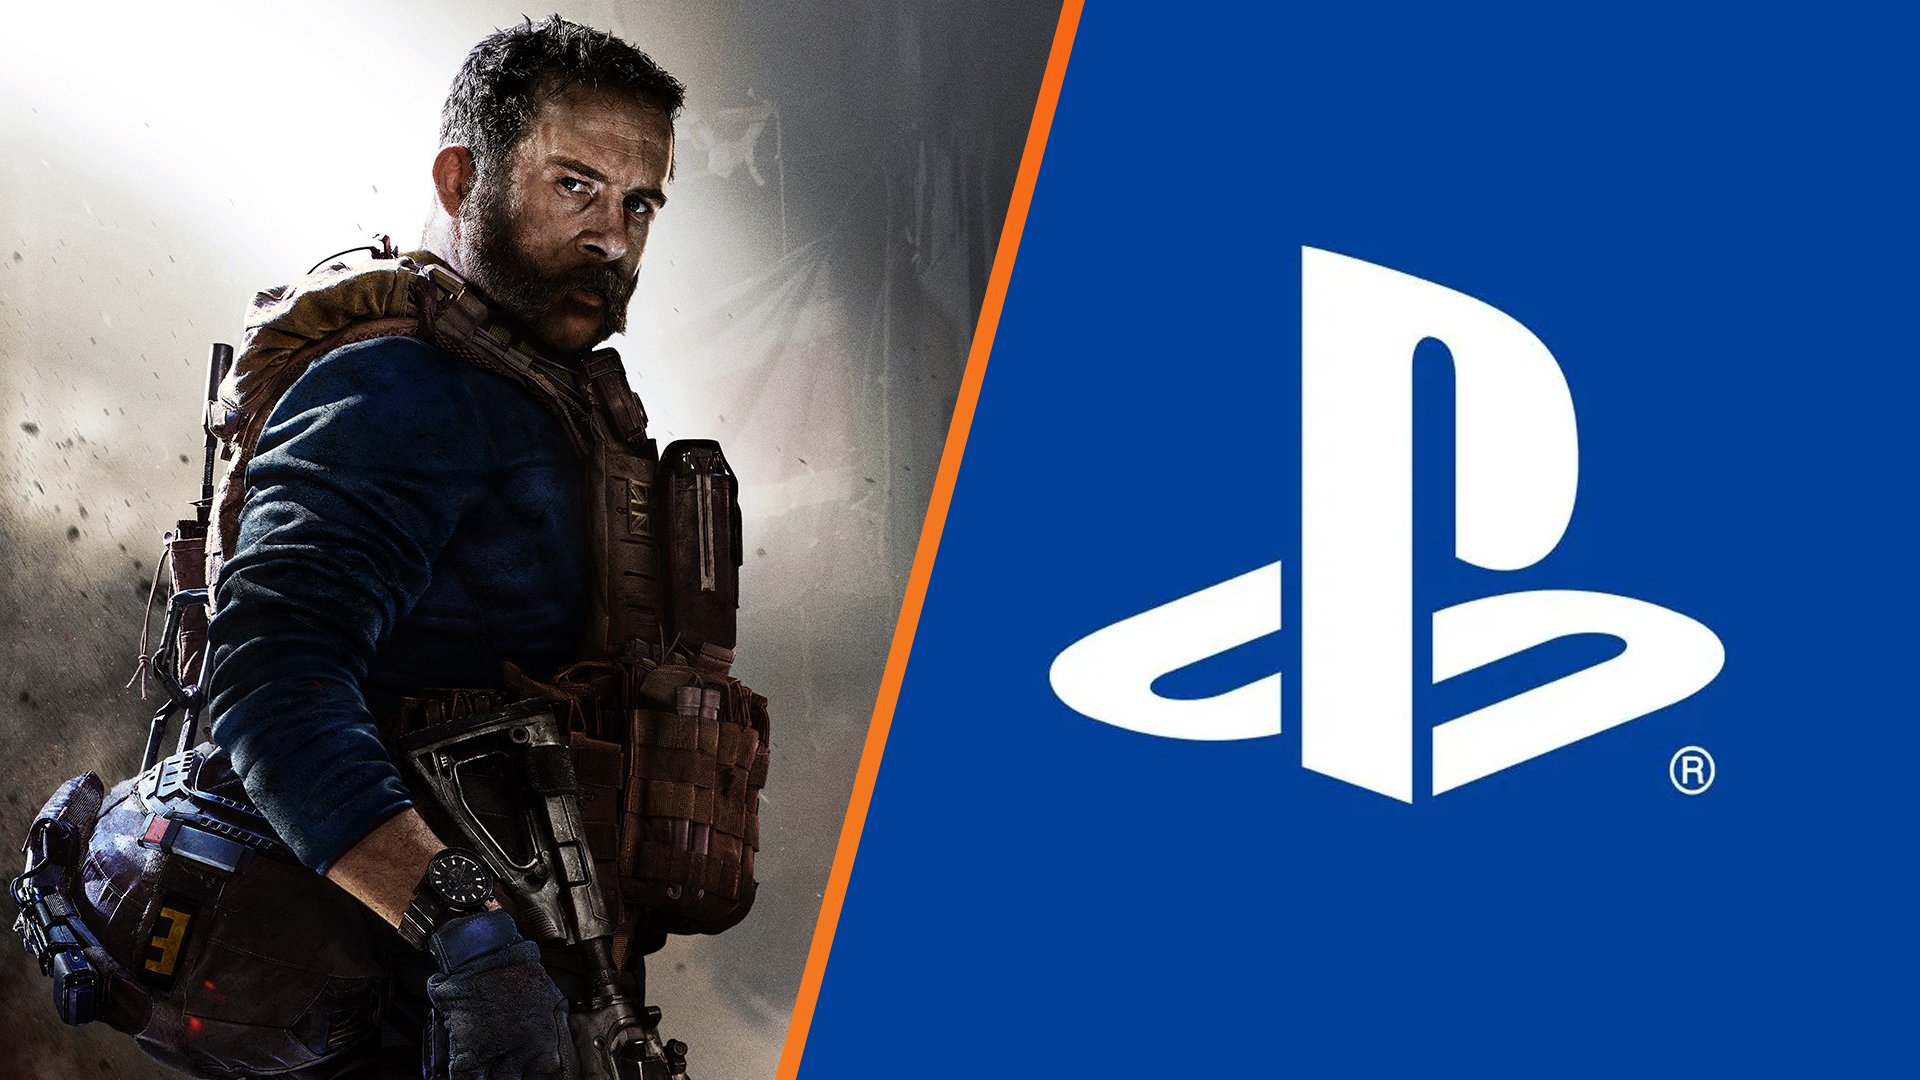 Activision confirms Call of Duty Mobile is officially bigger than